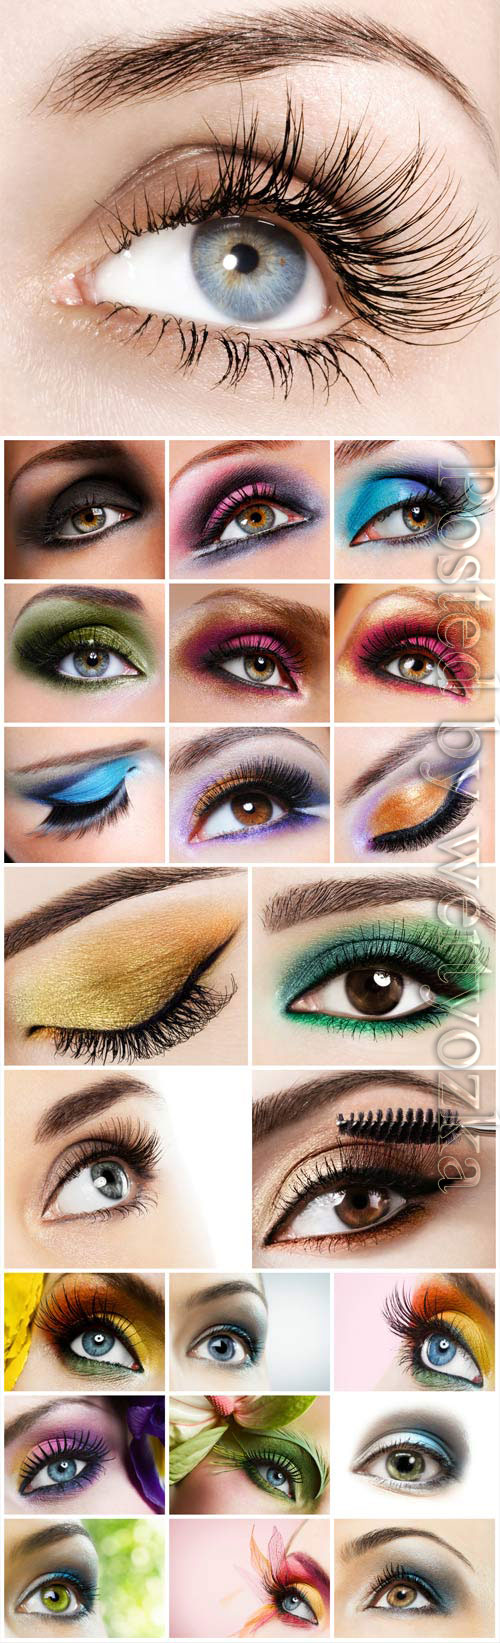 Eyes and makeup stock photo